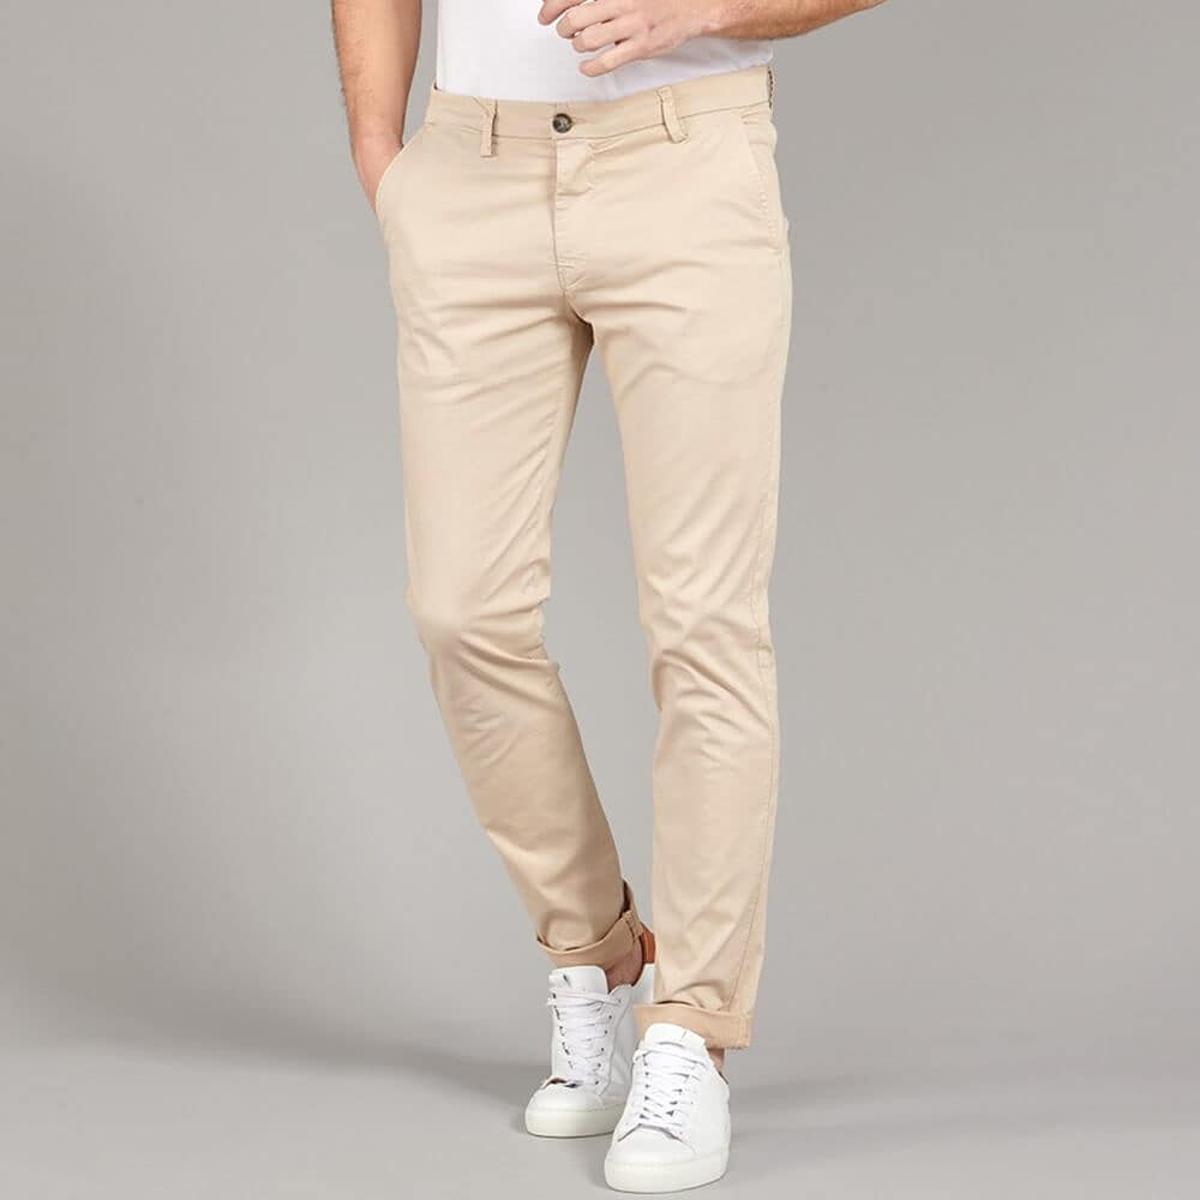 Pants For Men In Beige Color In Cotton Jeans Fabric